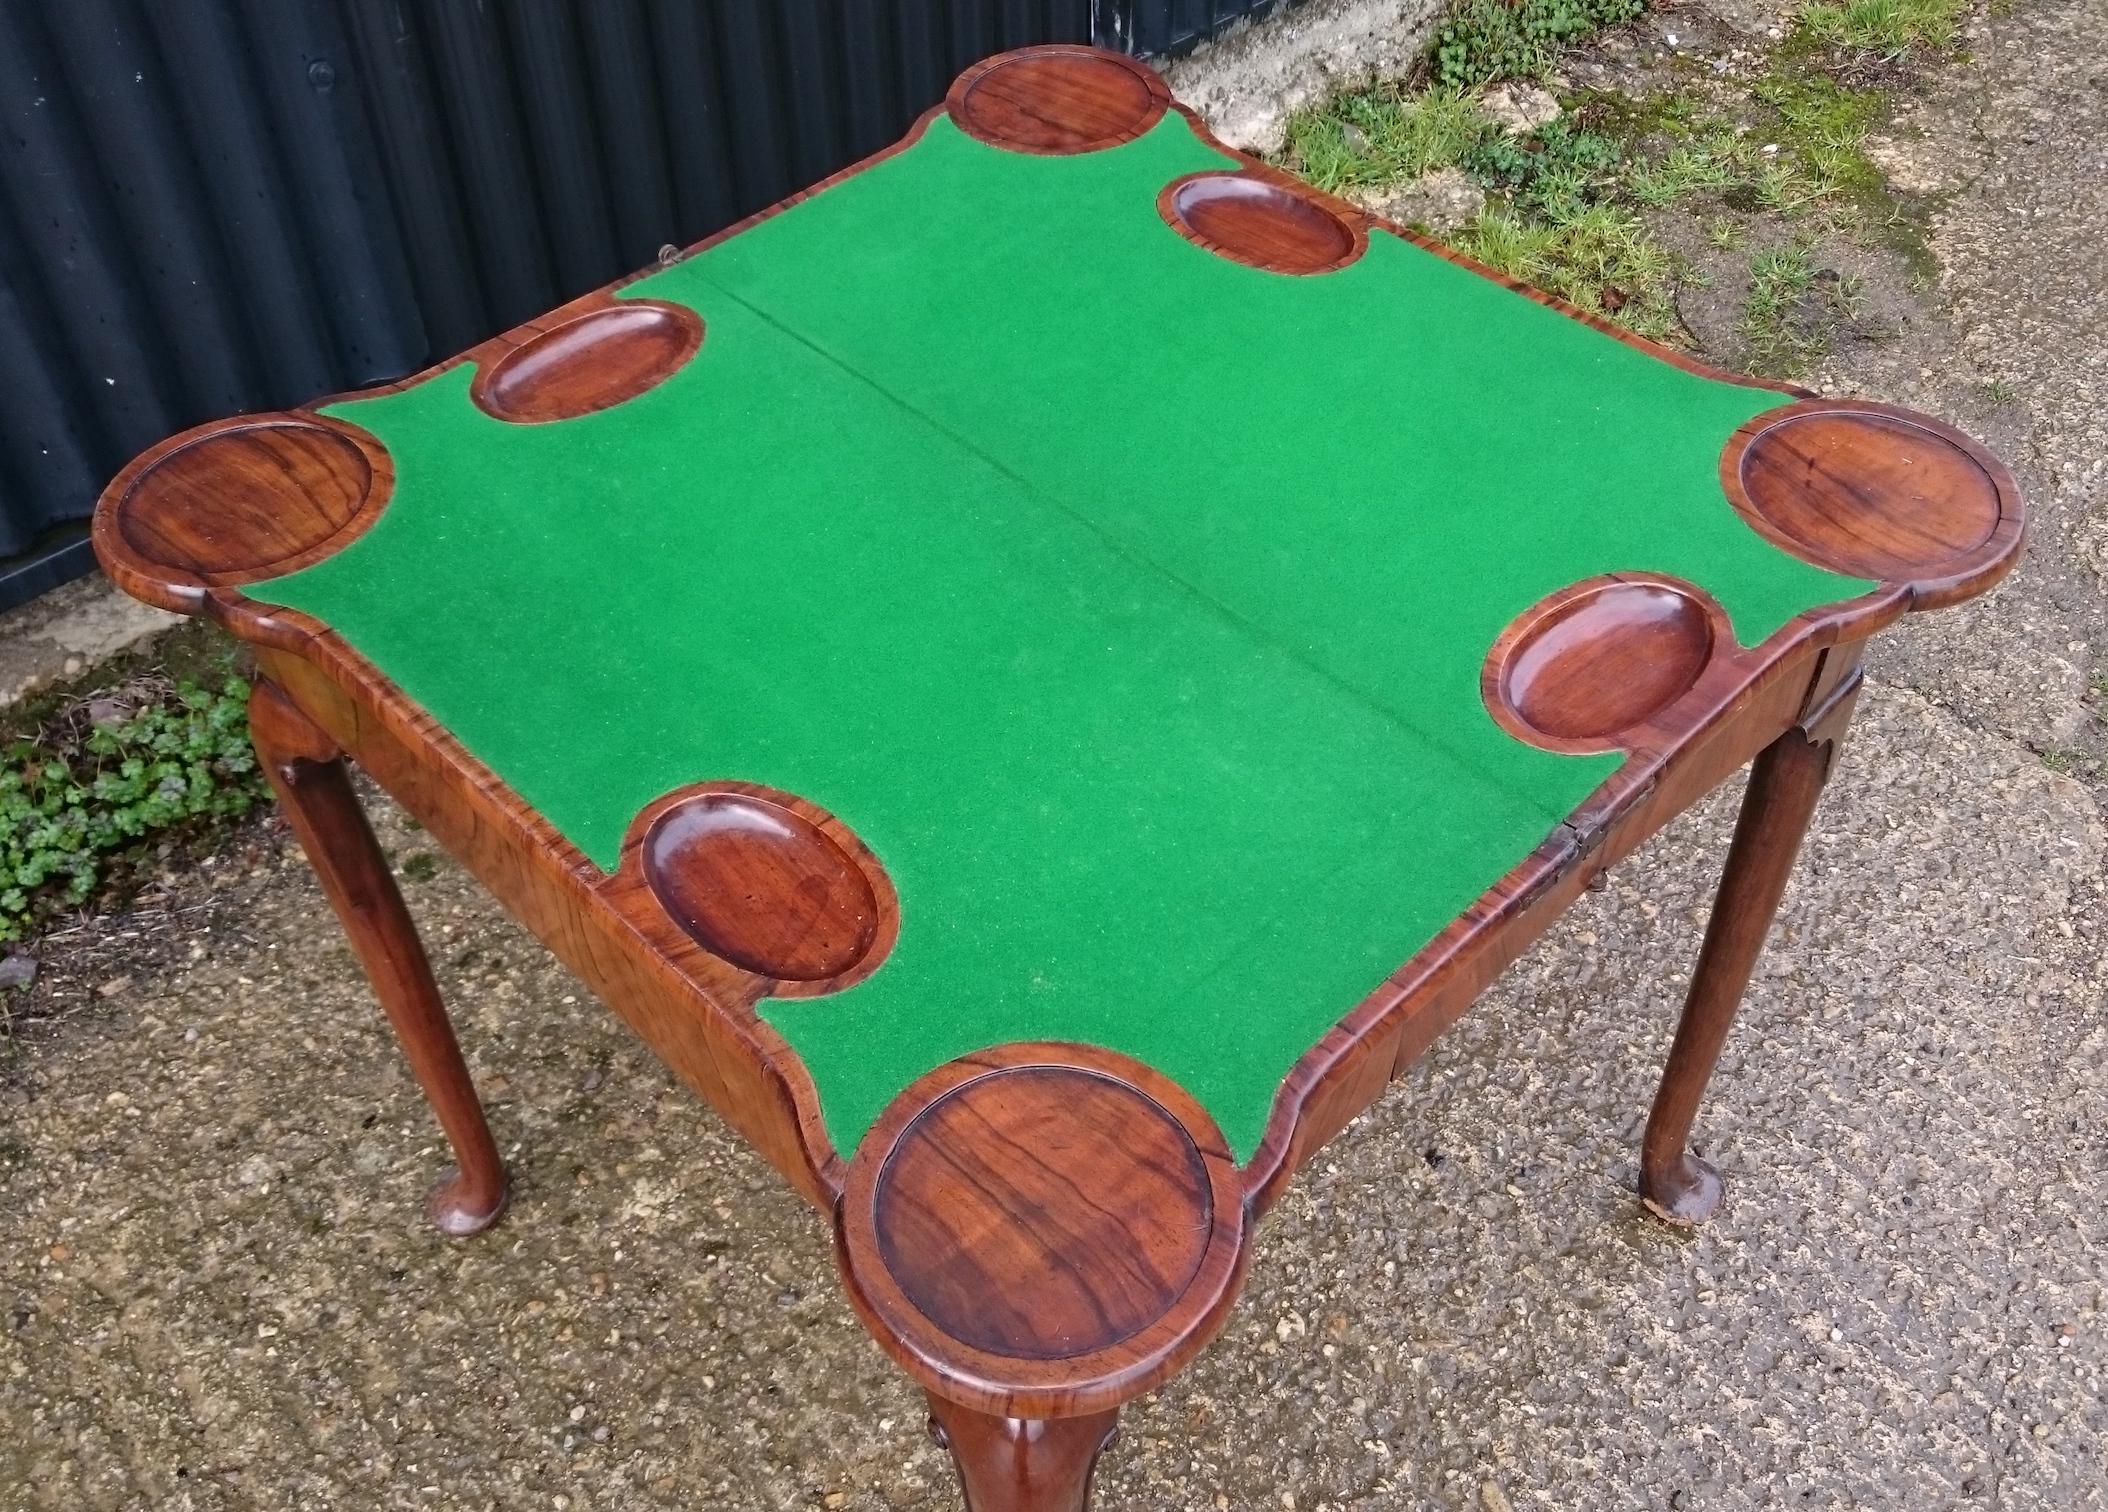 Early 18th century George I period walnut antique games table standing on cabriole legs with pad feet. This table is photographed here as it came in to us and will look even better when it has been waxed. The mechanism is unusual and works very